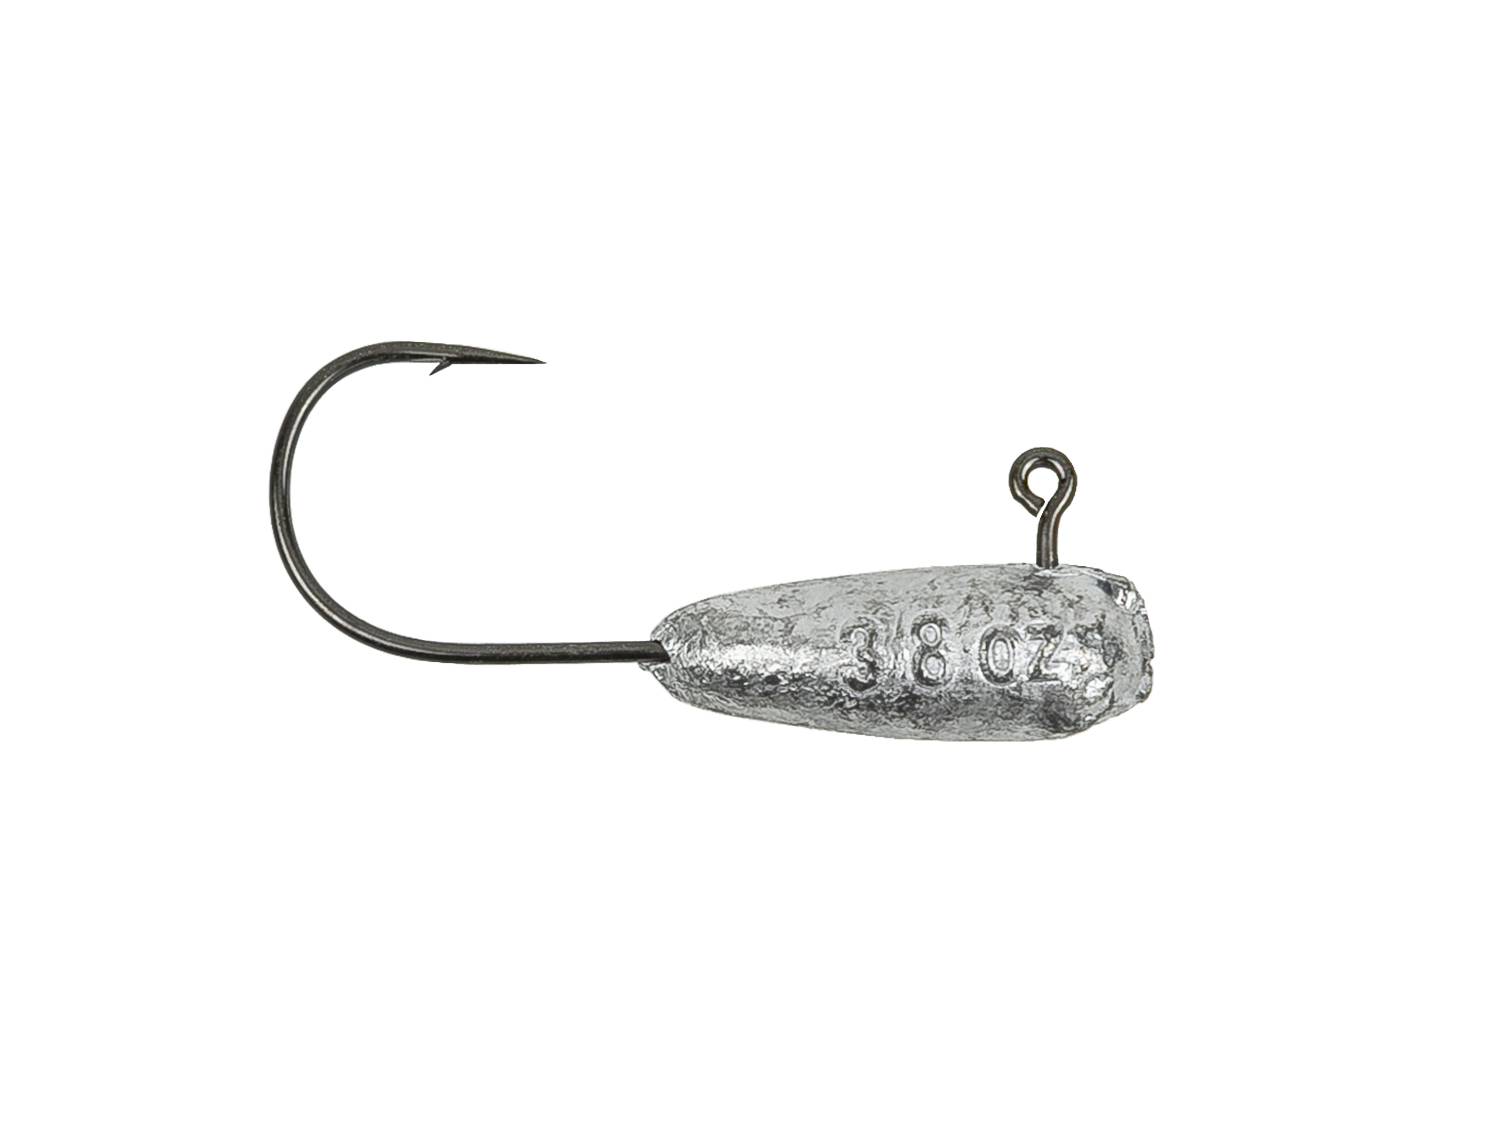 Spectacular 90 Degree Jig Hook At Luring Offers 